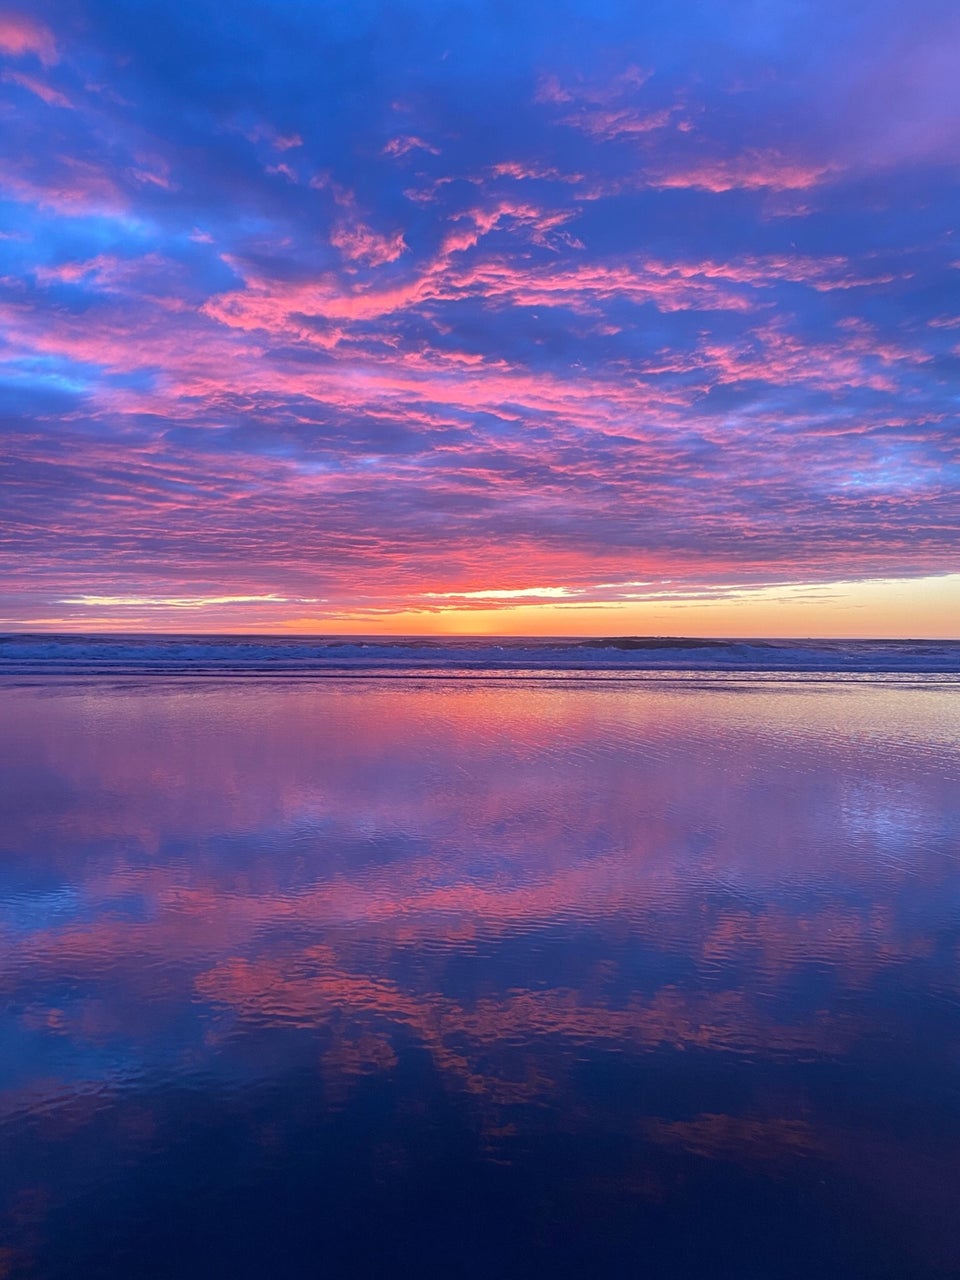 Tantek on X: ✨🌅💙 Last sunset of this revolution around the sun. #blue  #purple #pink #orange #yellow #beauty #beautiful #sky #clouds #sunset  #shore #sand #reflection #OceanBeach #SF #SanFrancisco #wallpaper  #background #noFilter (